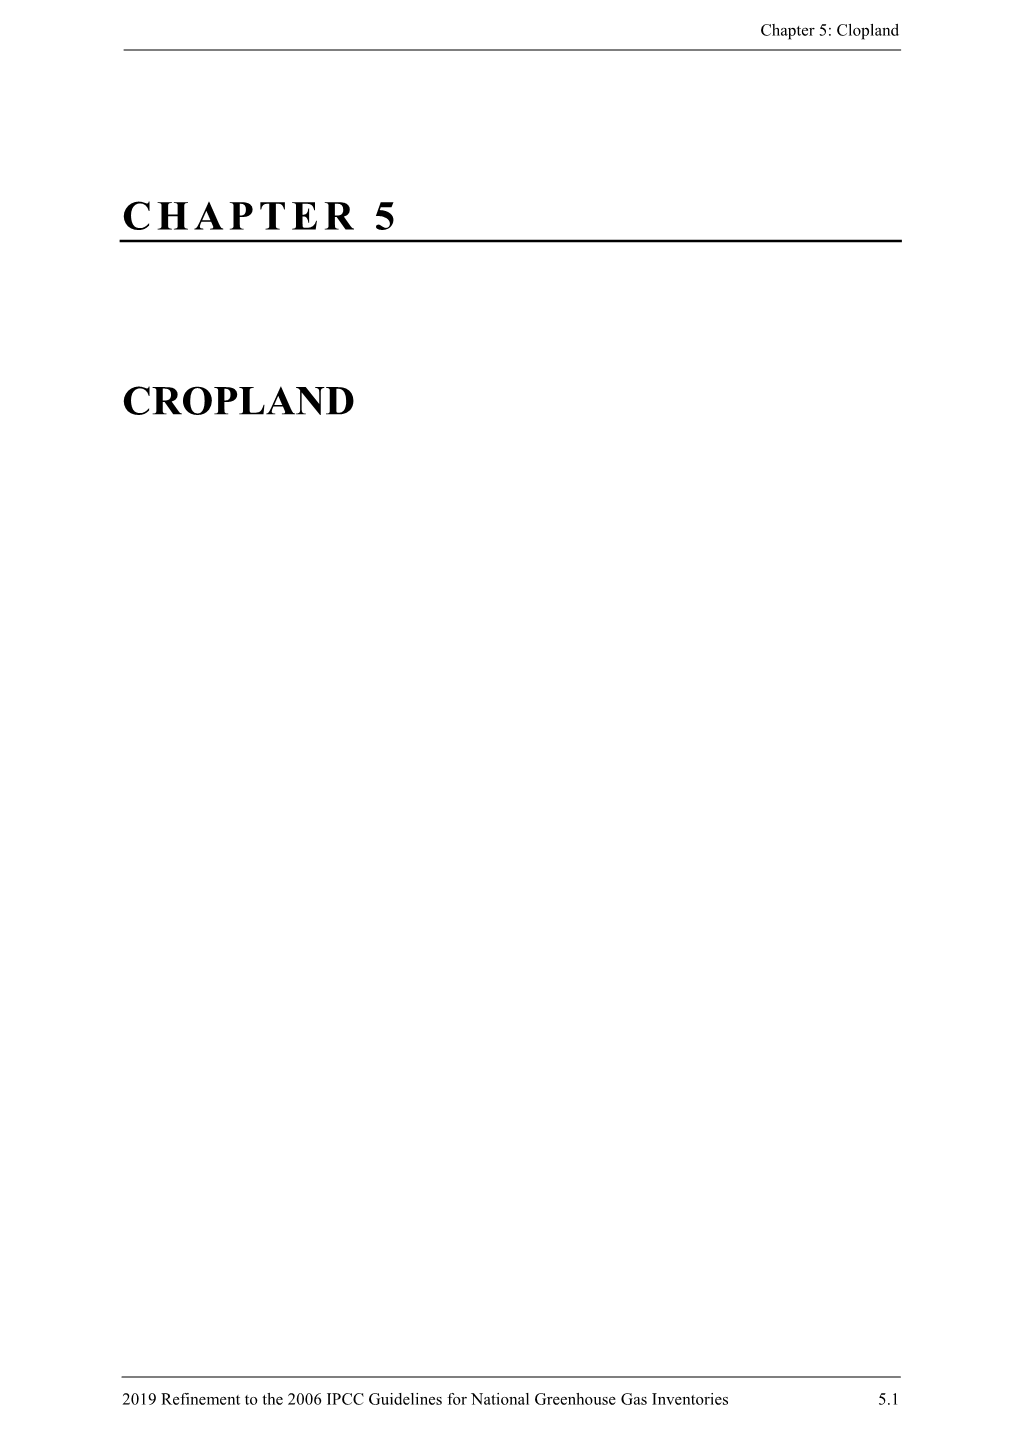 Chapter 5 Cropland